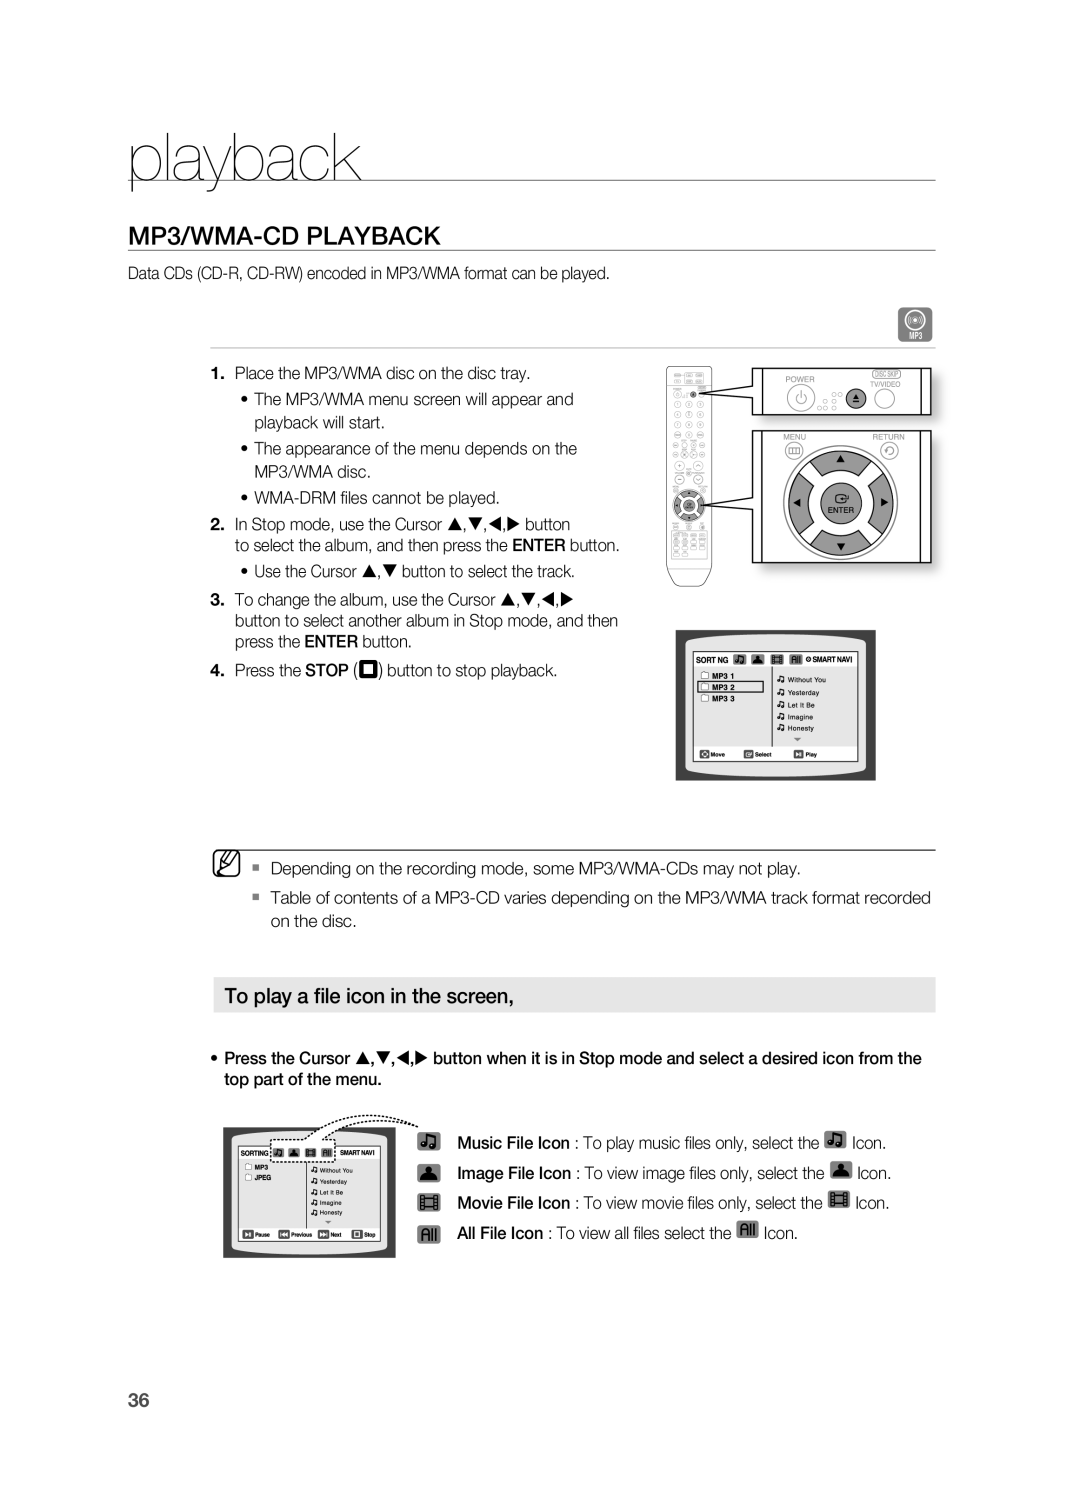 Samsung HT-Z510 manual playback, MP3/WMA-CDPLAYBACK, To play a file icon in the screen 